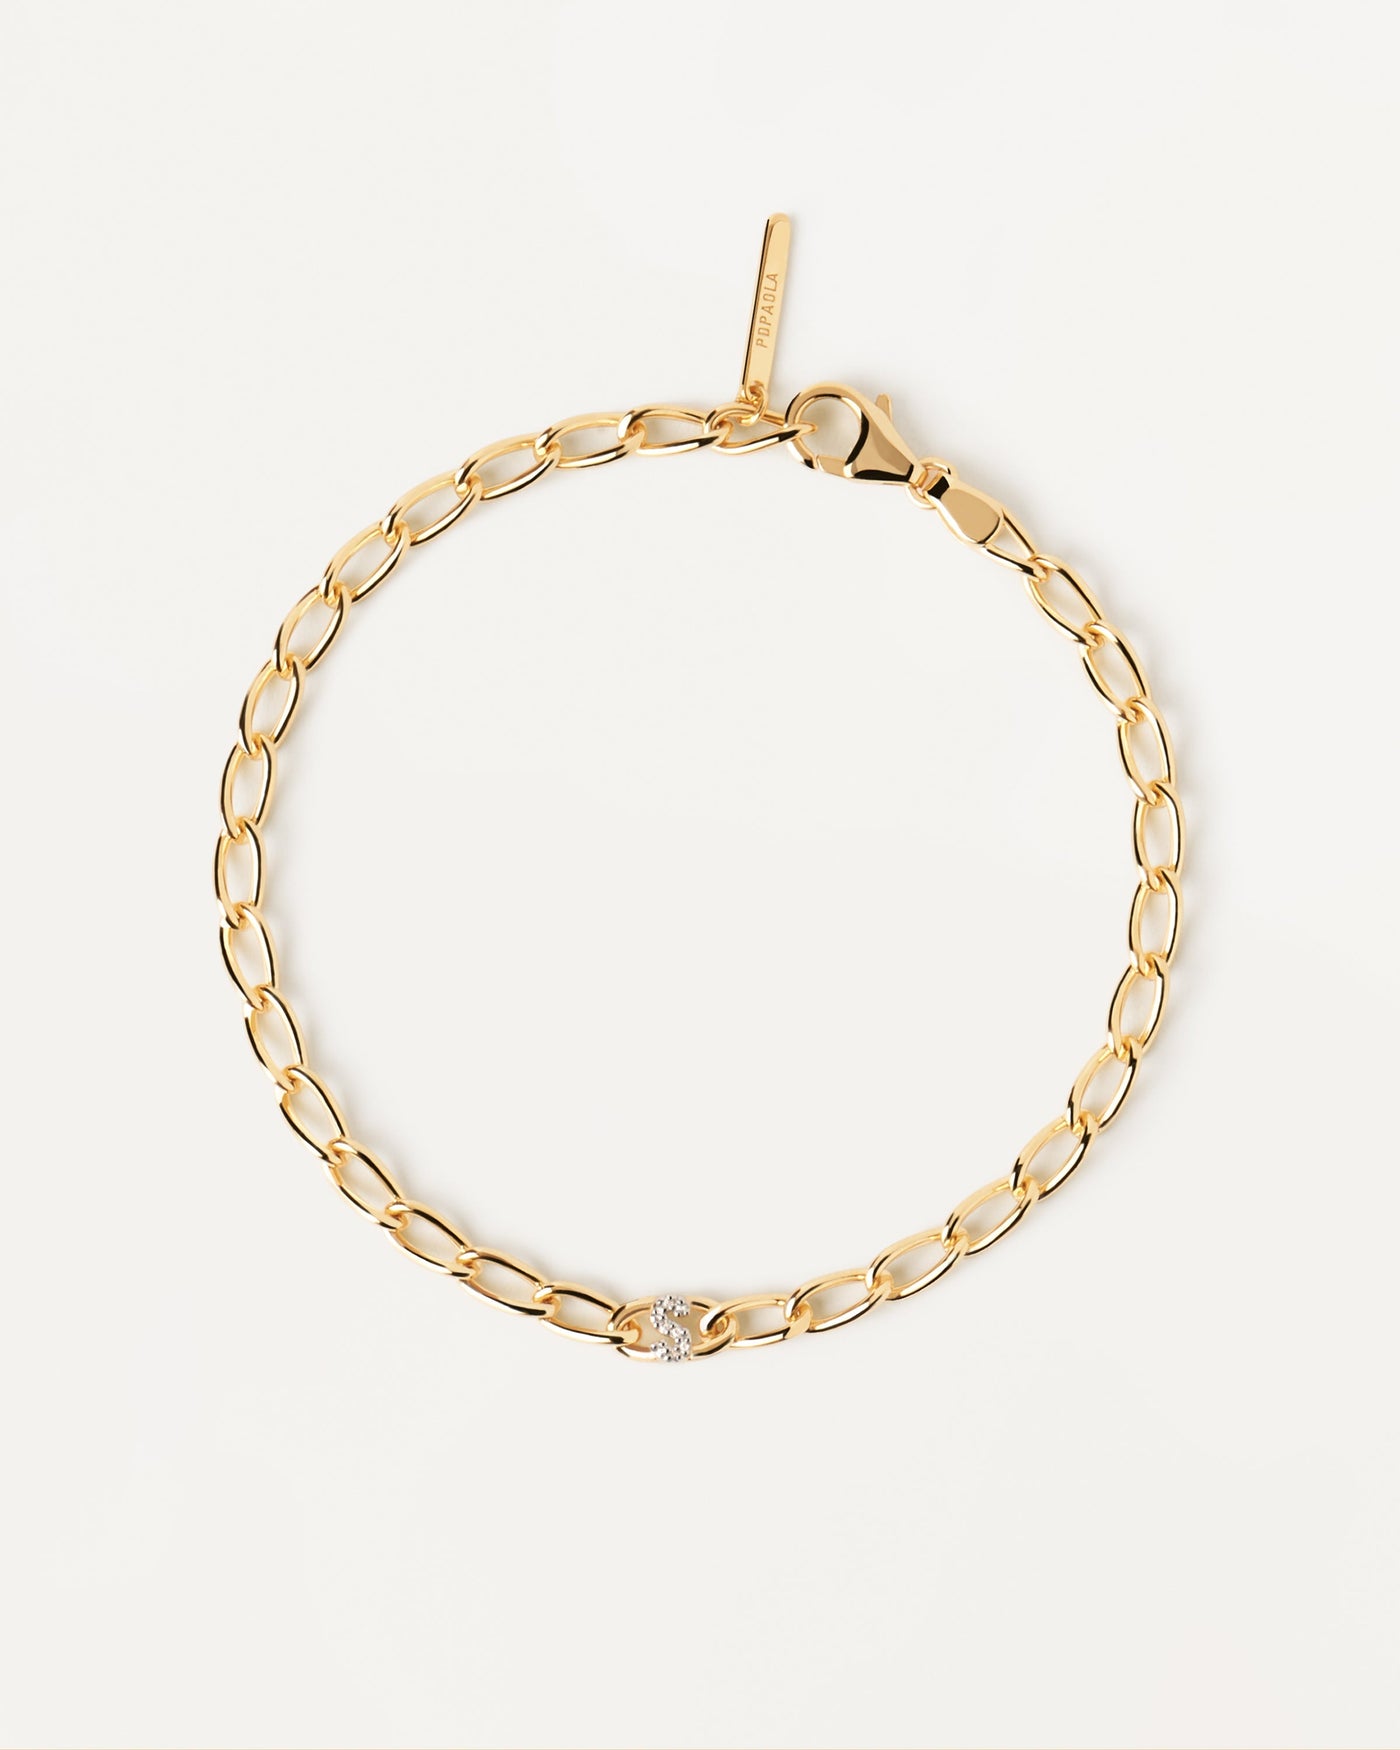 2023 Selection | Letter S Chain Bracelet. cable chain bracelet in gold-plated silver with initial S in zirconia. Get the latest arrival from PDPAOLA. Place your order safely and get this Best Seller. Free Shipping.